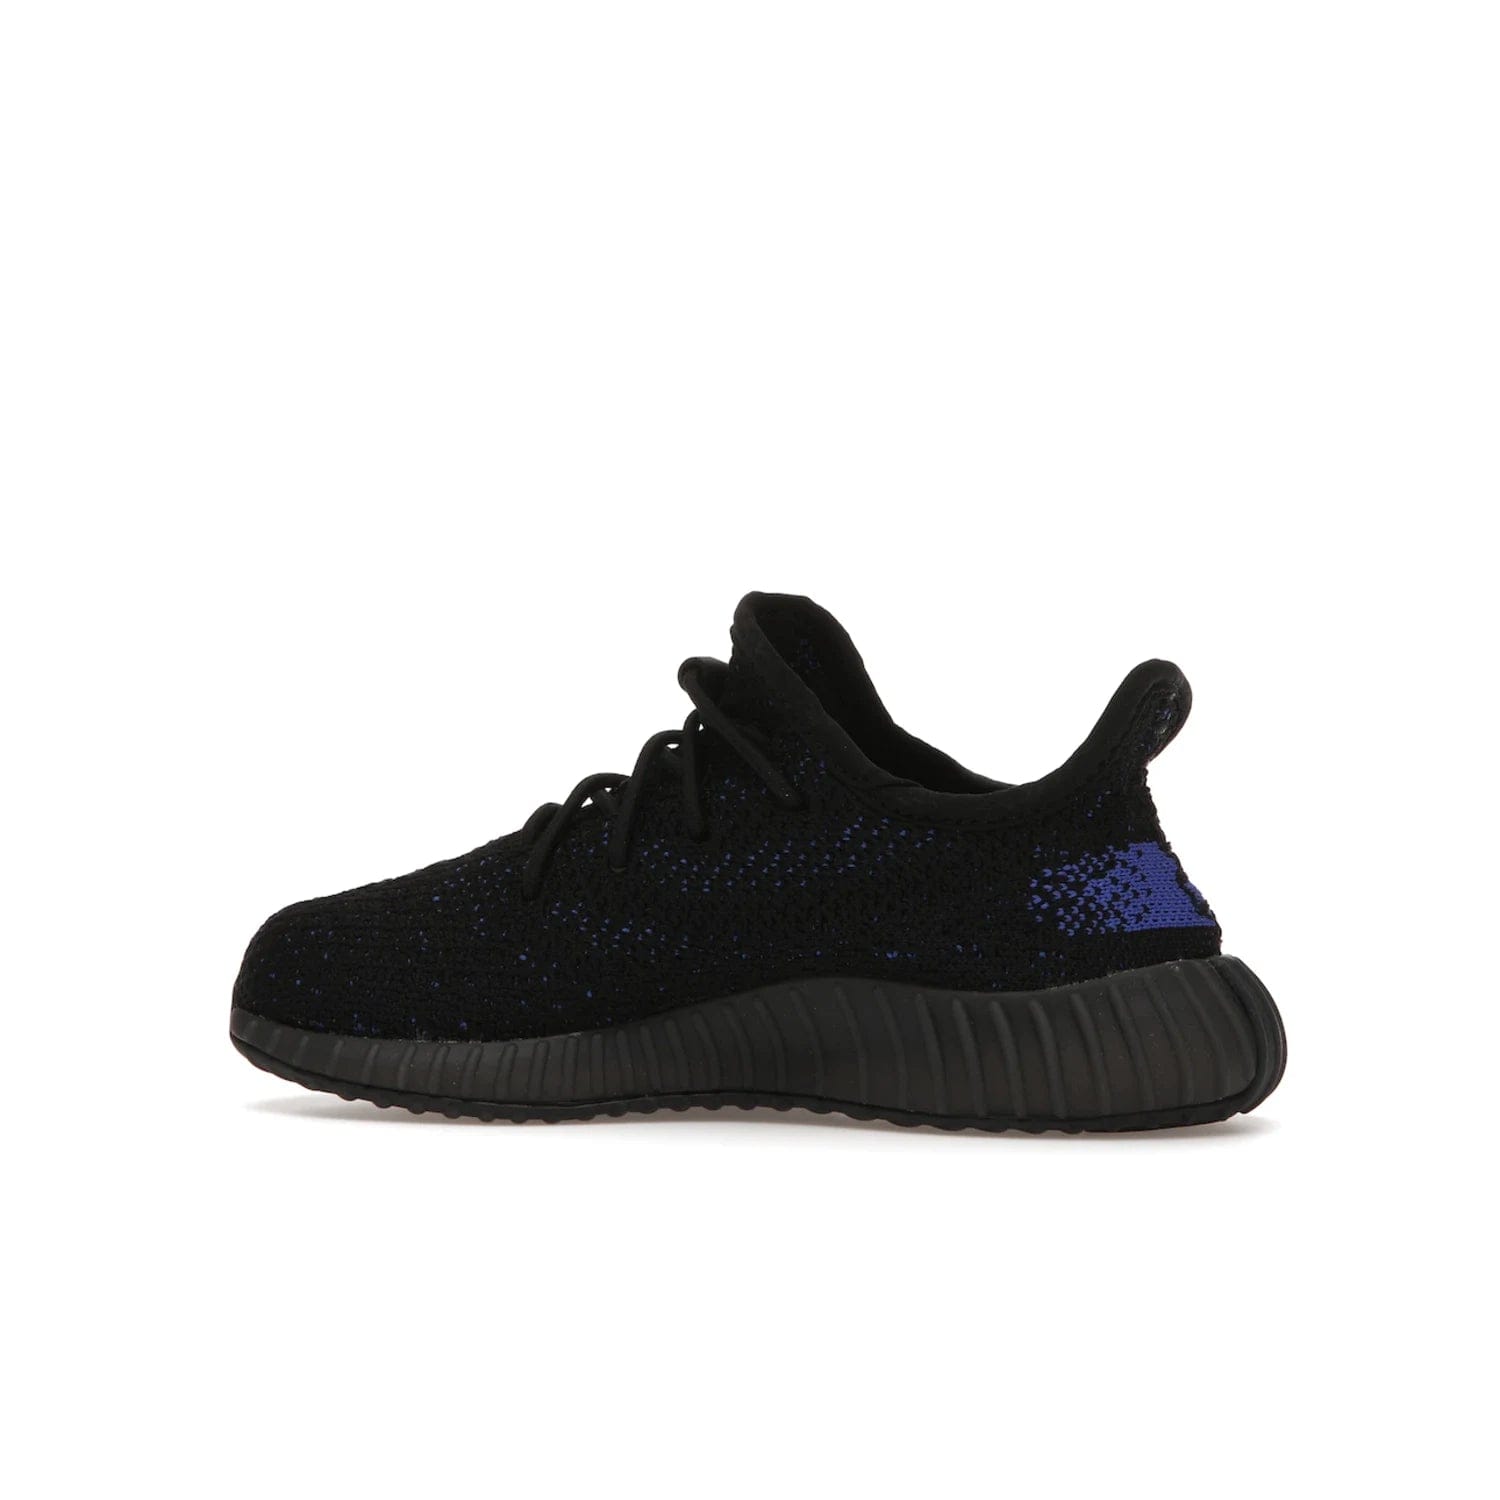 adidas Yeezy Boost 350 V2 Dazzling Blue (Kids) - Image 21 - Only at www.BallersClubKickz.com - Shop the adidas Yeezy Boost 350 V2 Dazzling Blue (Kids). Features a black Primeknit upper with a royal blue 'SPLY-350' streak and a full-length Boost midsole. Durable rubber outsole provides plenty of traction. Available for $160.